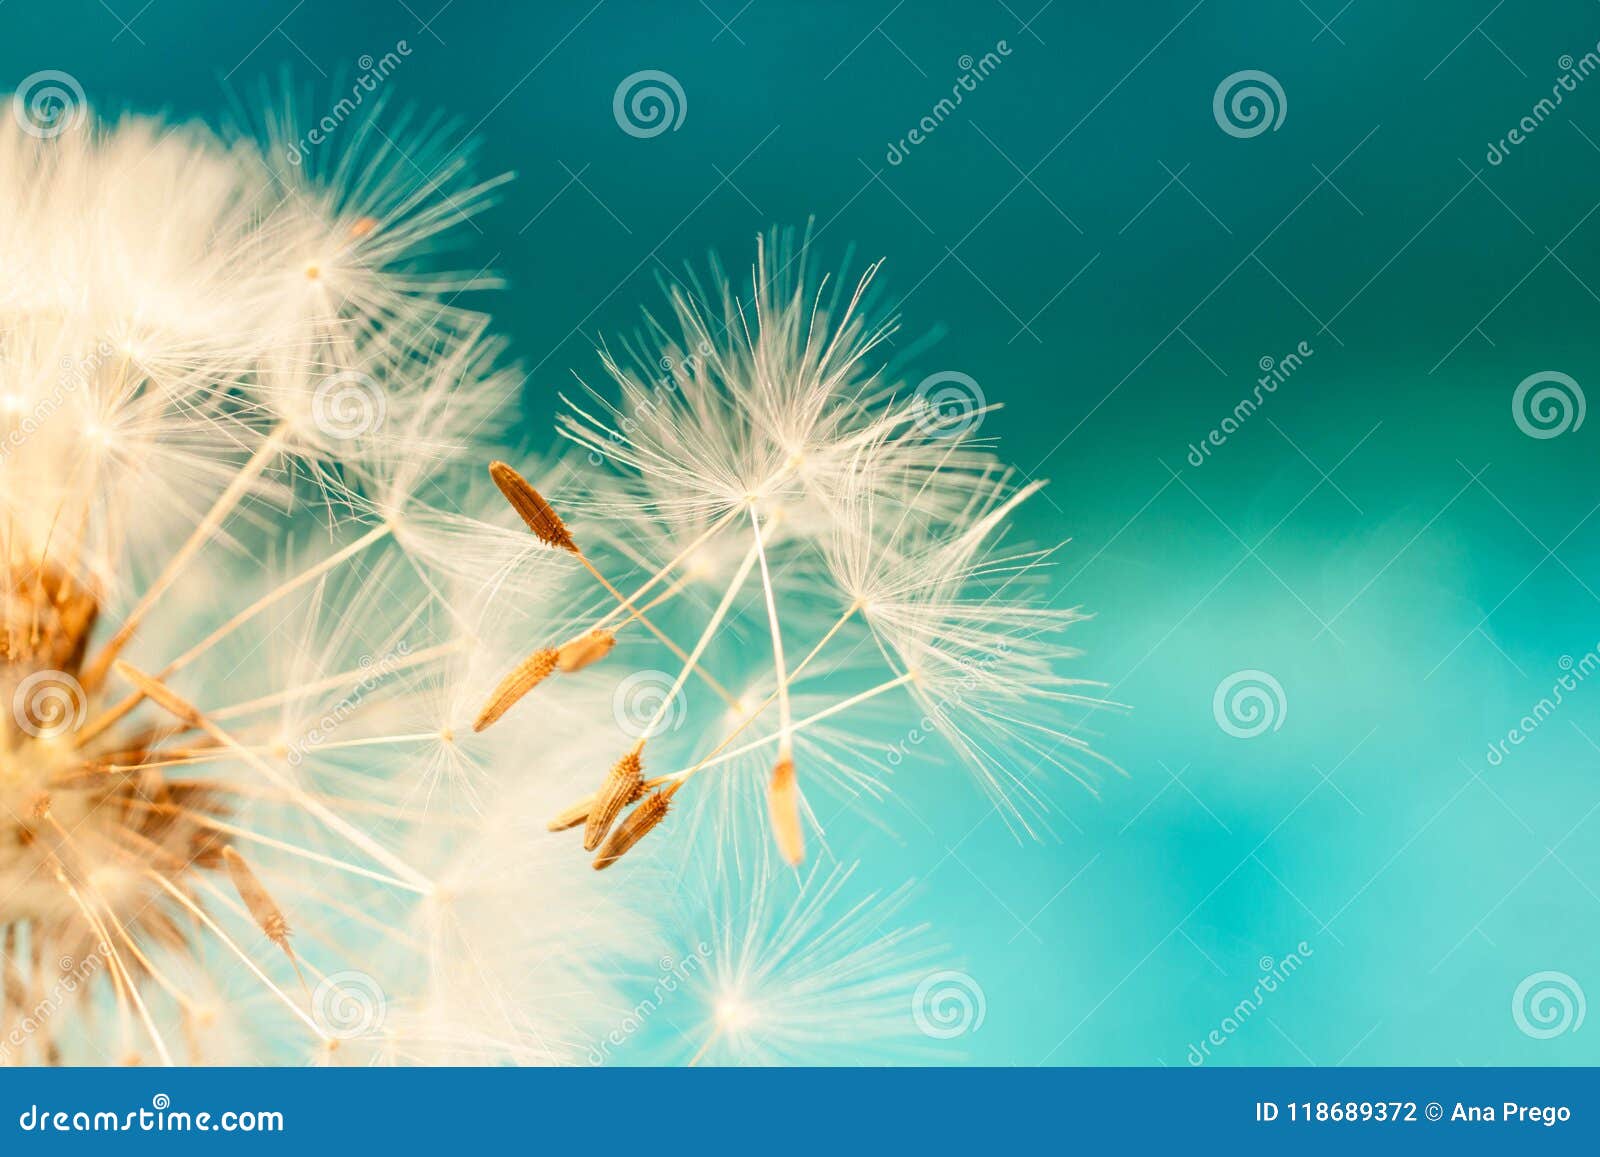 white dandelion seeds blowing in blue turquoise background